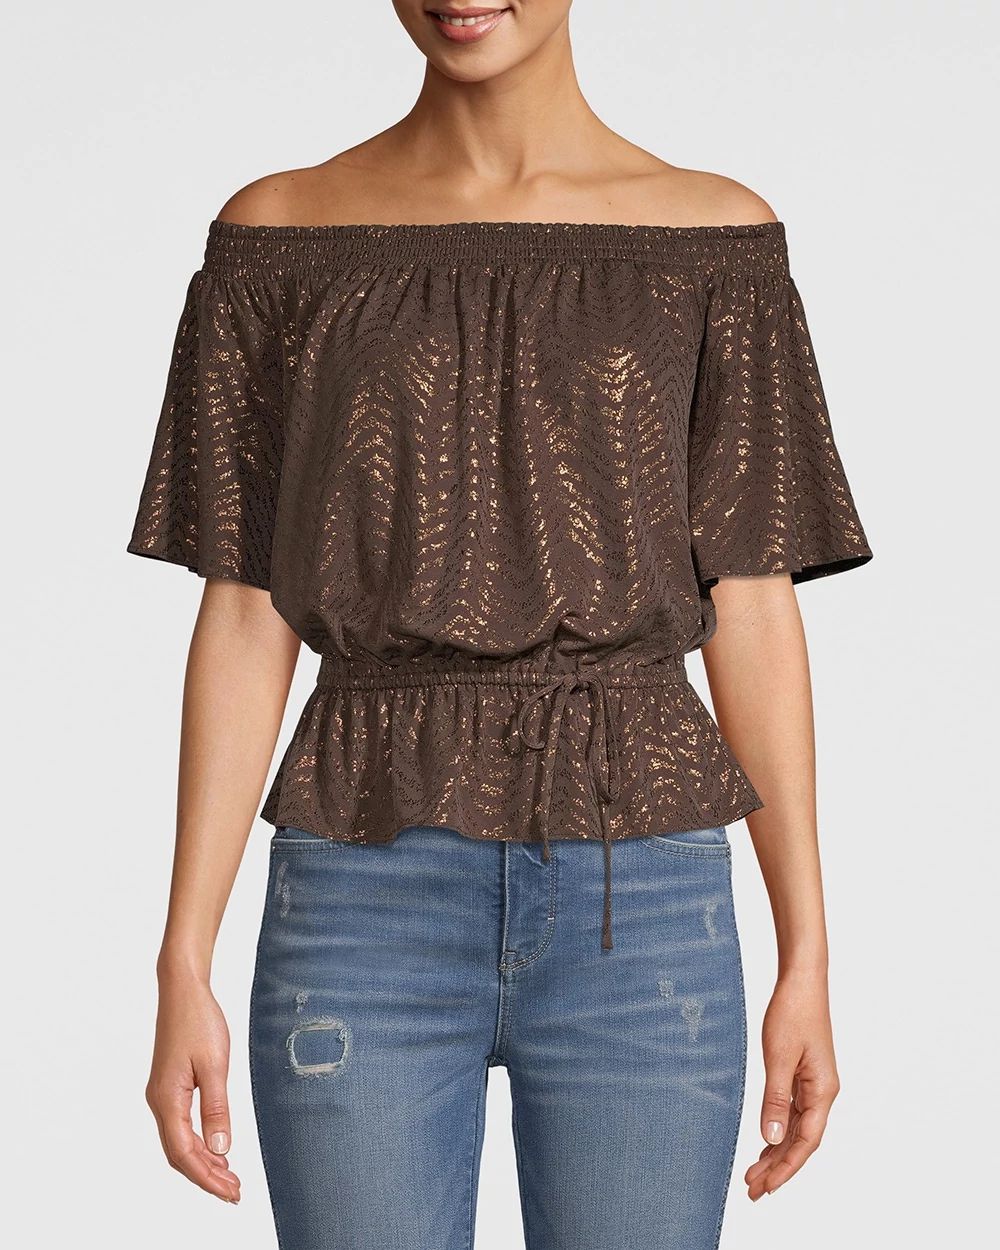 JERSEY KNIT OFF-THE-SHOULDER TOP